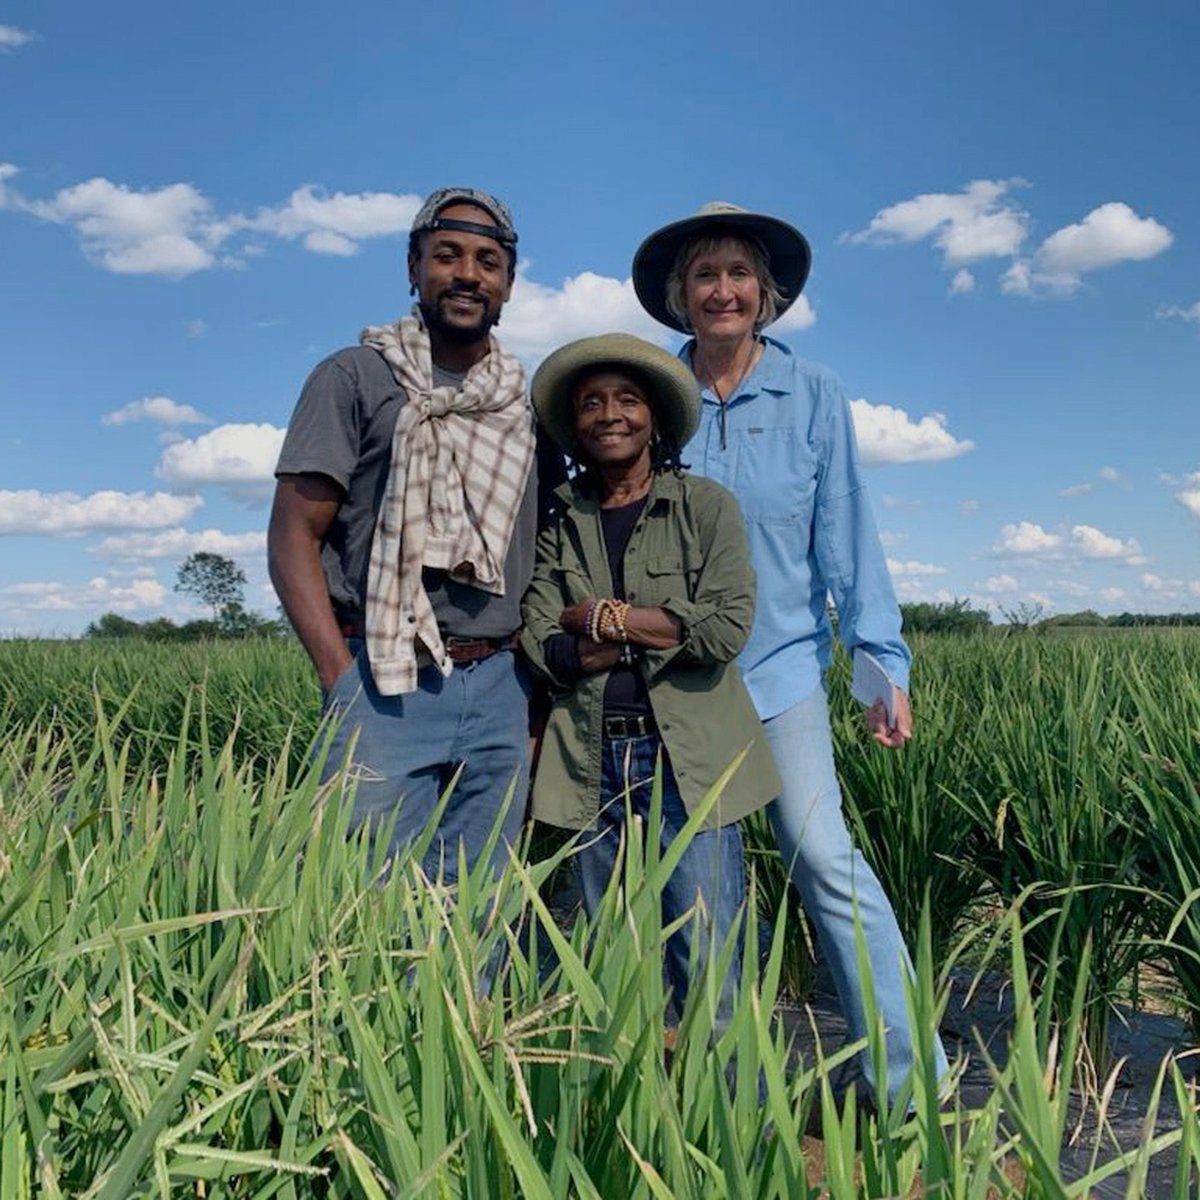 'A co-op Graddick has organized in East Alabama, comprised of young farmers who are heirs & descendants of the Federation of Southern Cooperatives, will grow rice on two leased acres next year. They’ll give their crops to food shelves in East Alabama.' 💚 bit.ly/3PMtsJu